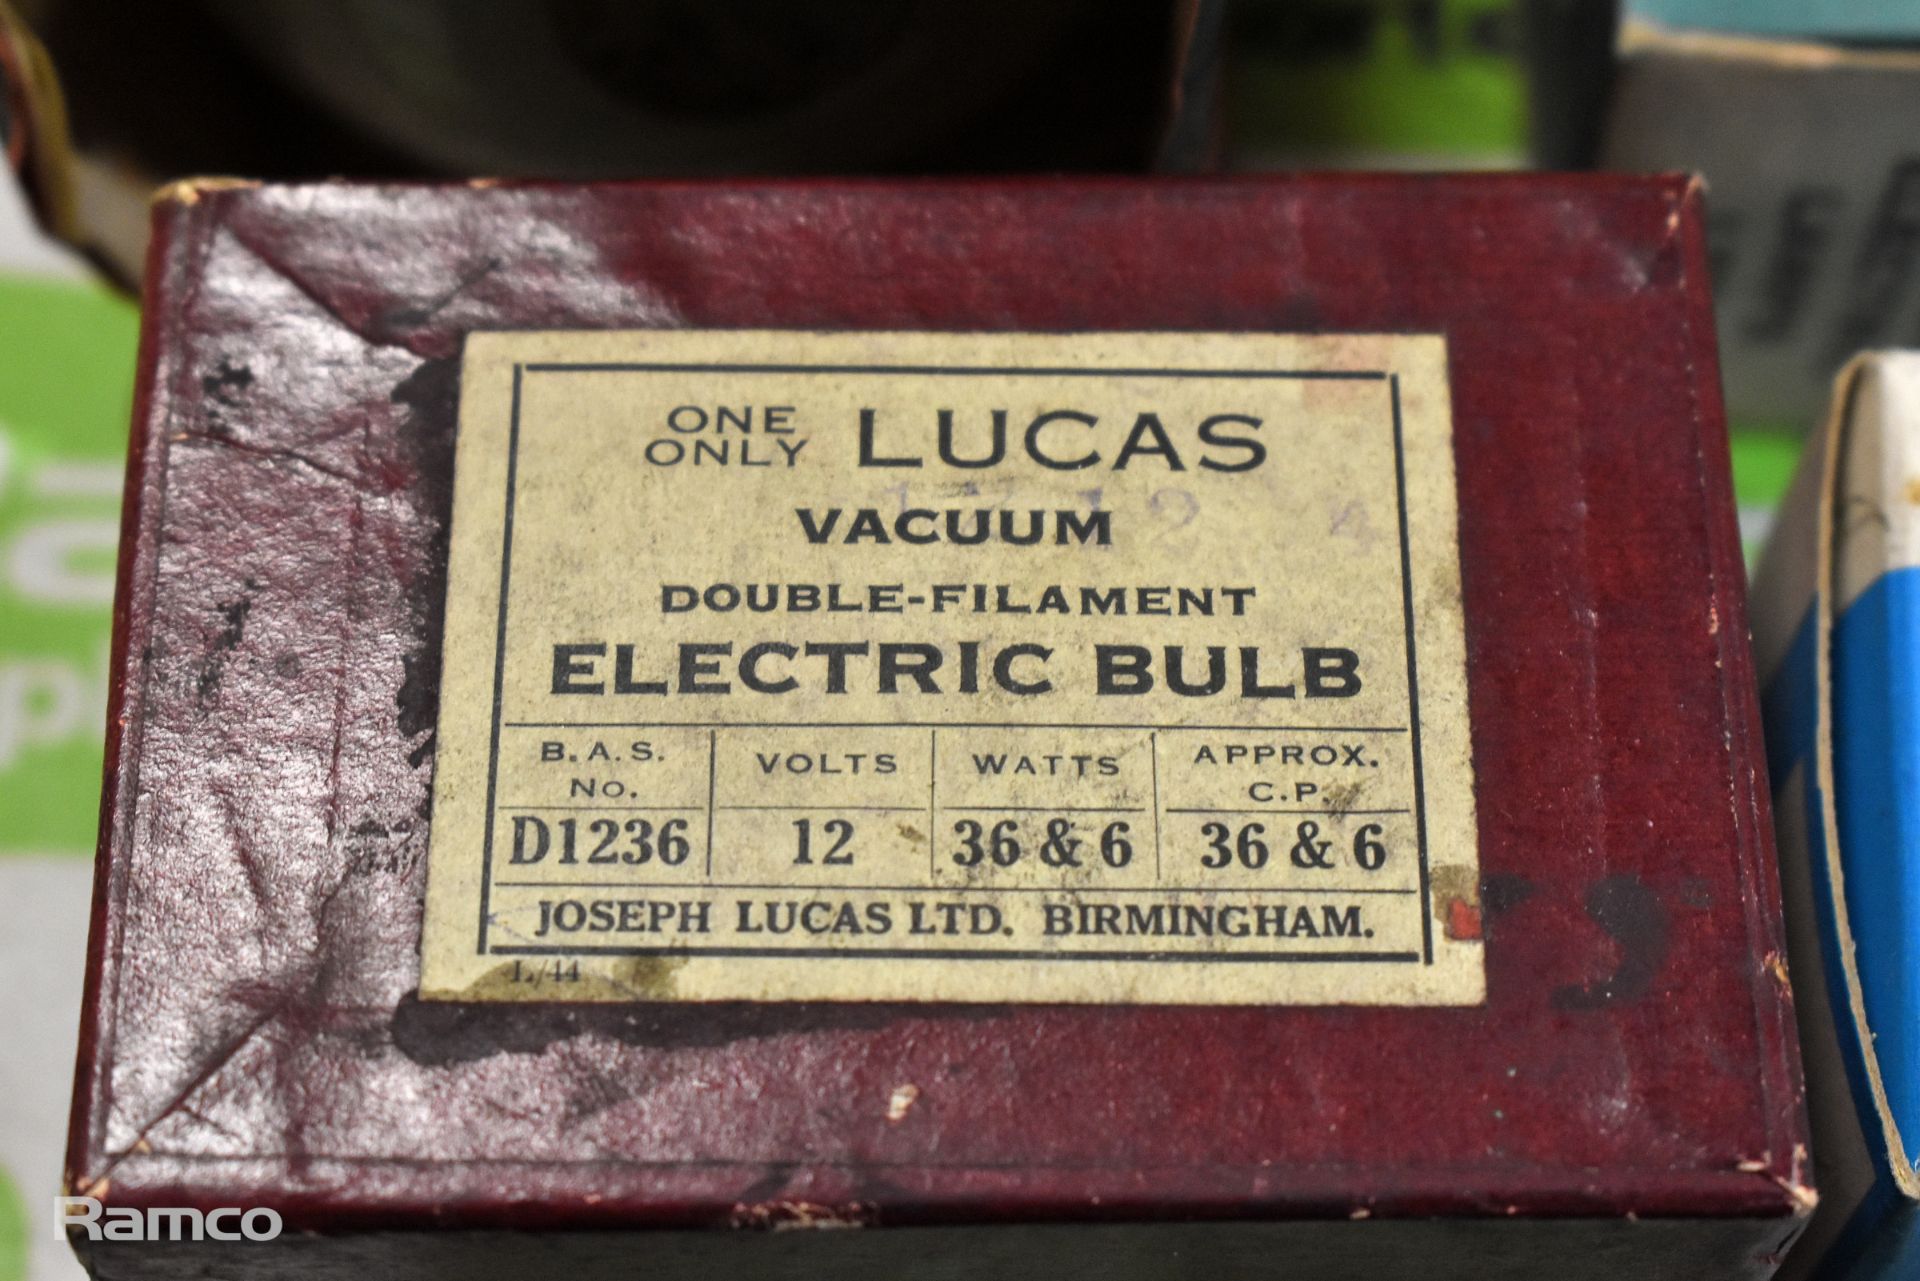 Vintage lighting equipment - bulbs, torches, switches - brands: Philips, Atlas, Merlite, Mazda - Image 3 of 16